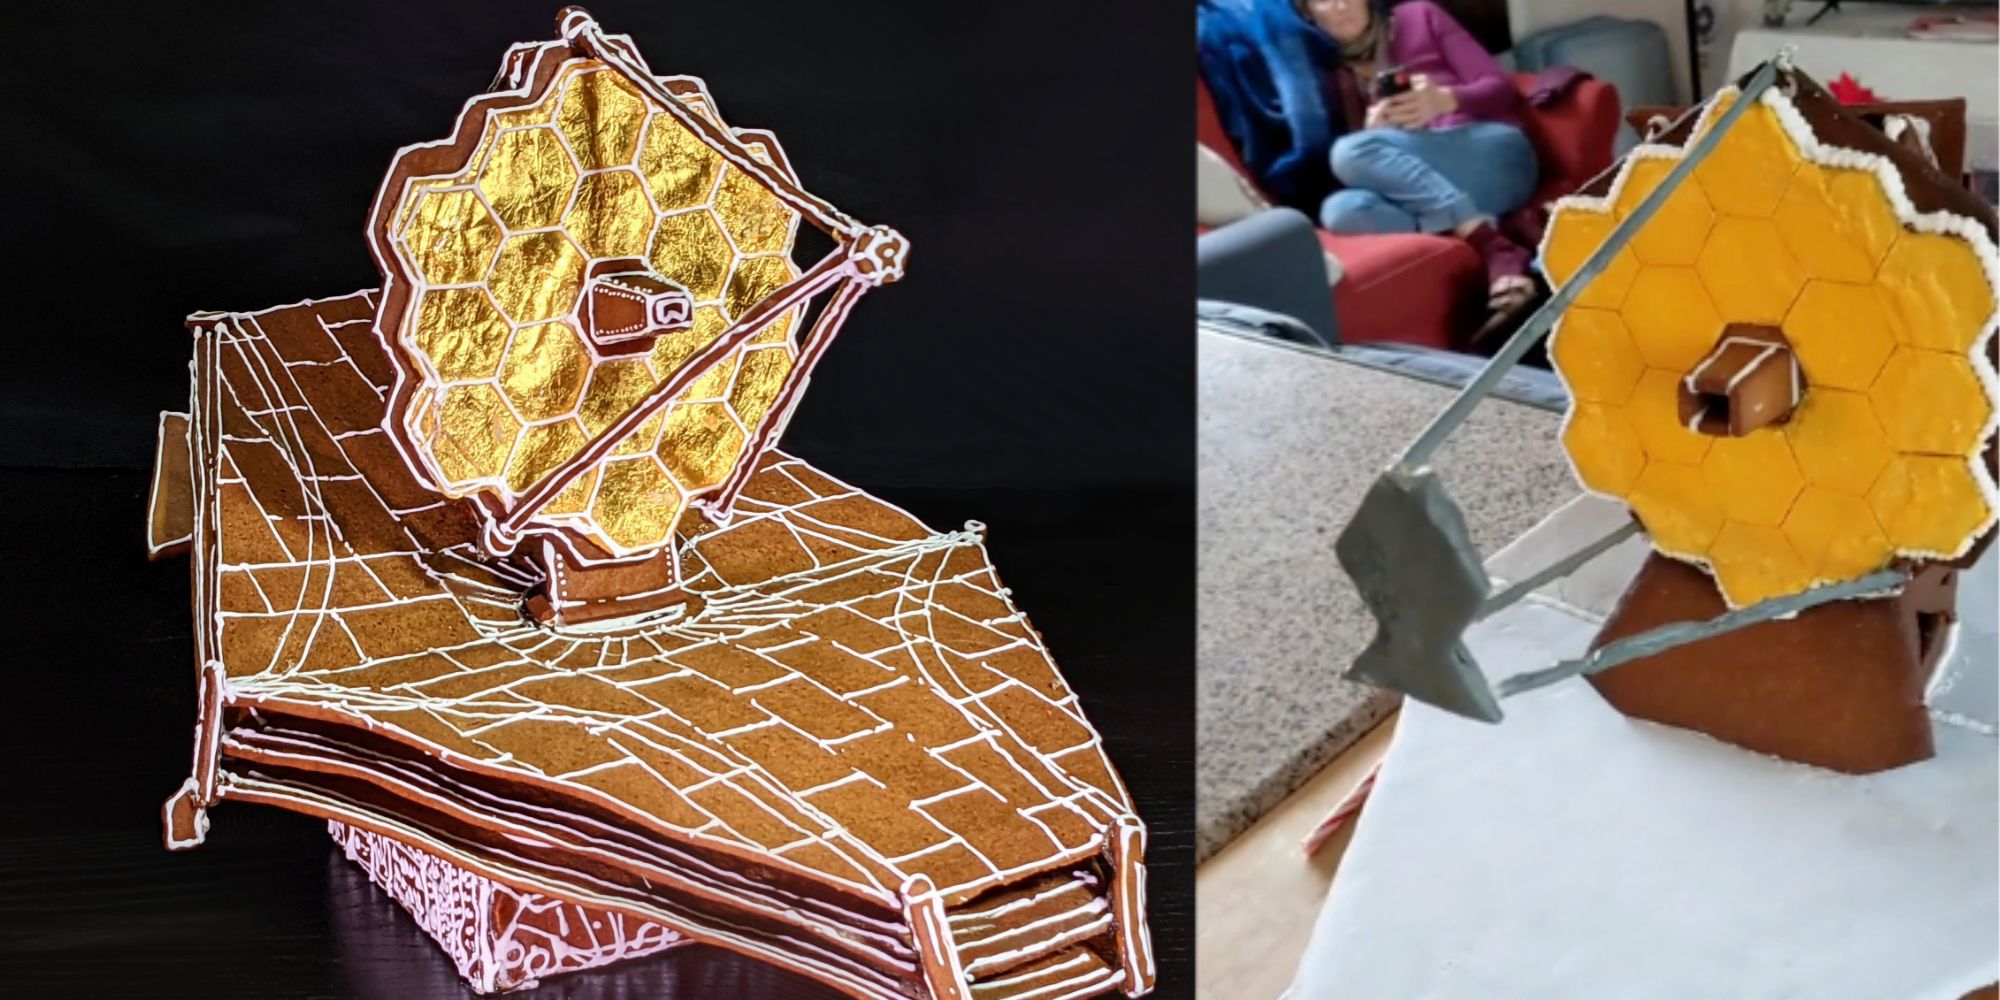 Gingerbread versions of the James Webb Space Telescope